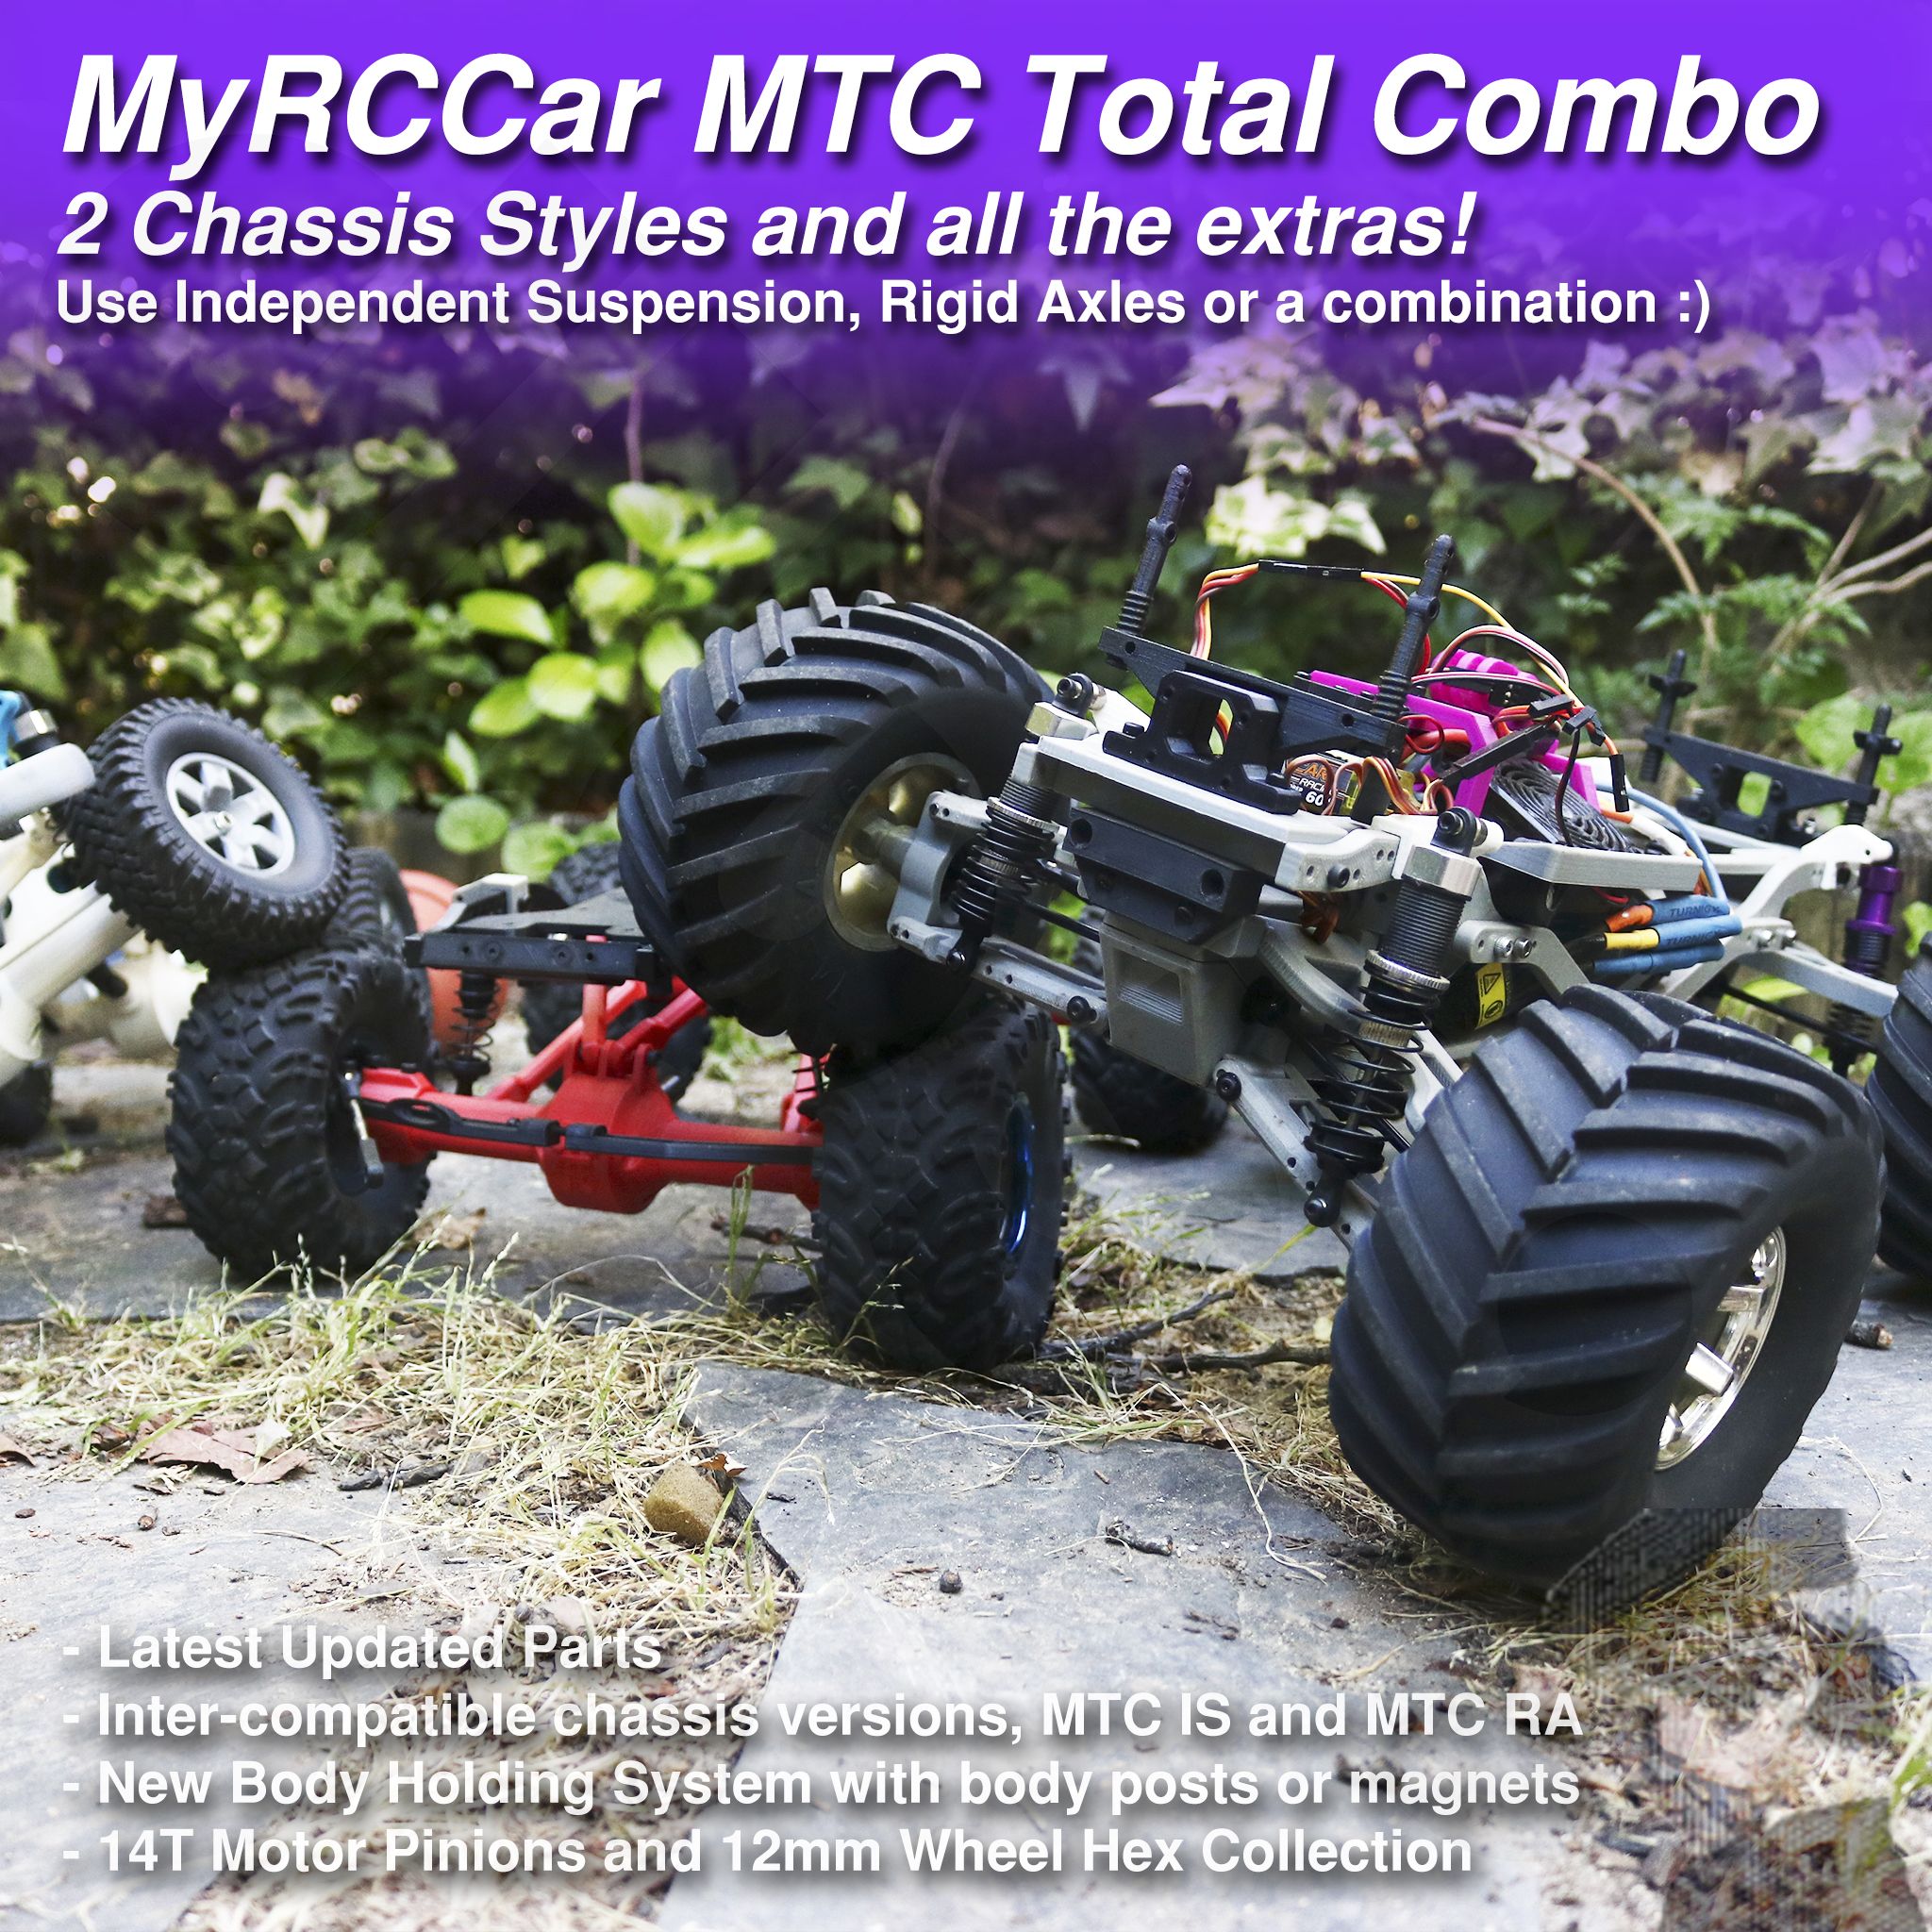 MyRCCar MTC Total Combo 2 Chassis Styles and all the extras! Use Independent Suspension, Rigid Axles or,a’combination «) P a 3D file MyRCCar MTC Total Combo, Two 1/10 RC Off-Road Chassis Styles and may extras!・3D printable design to download, dlb5